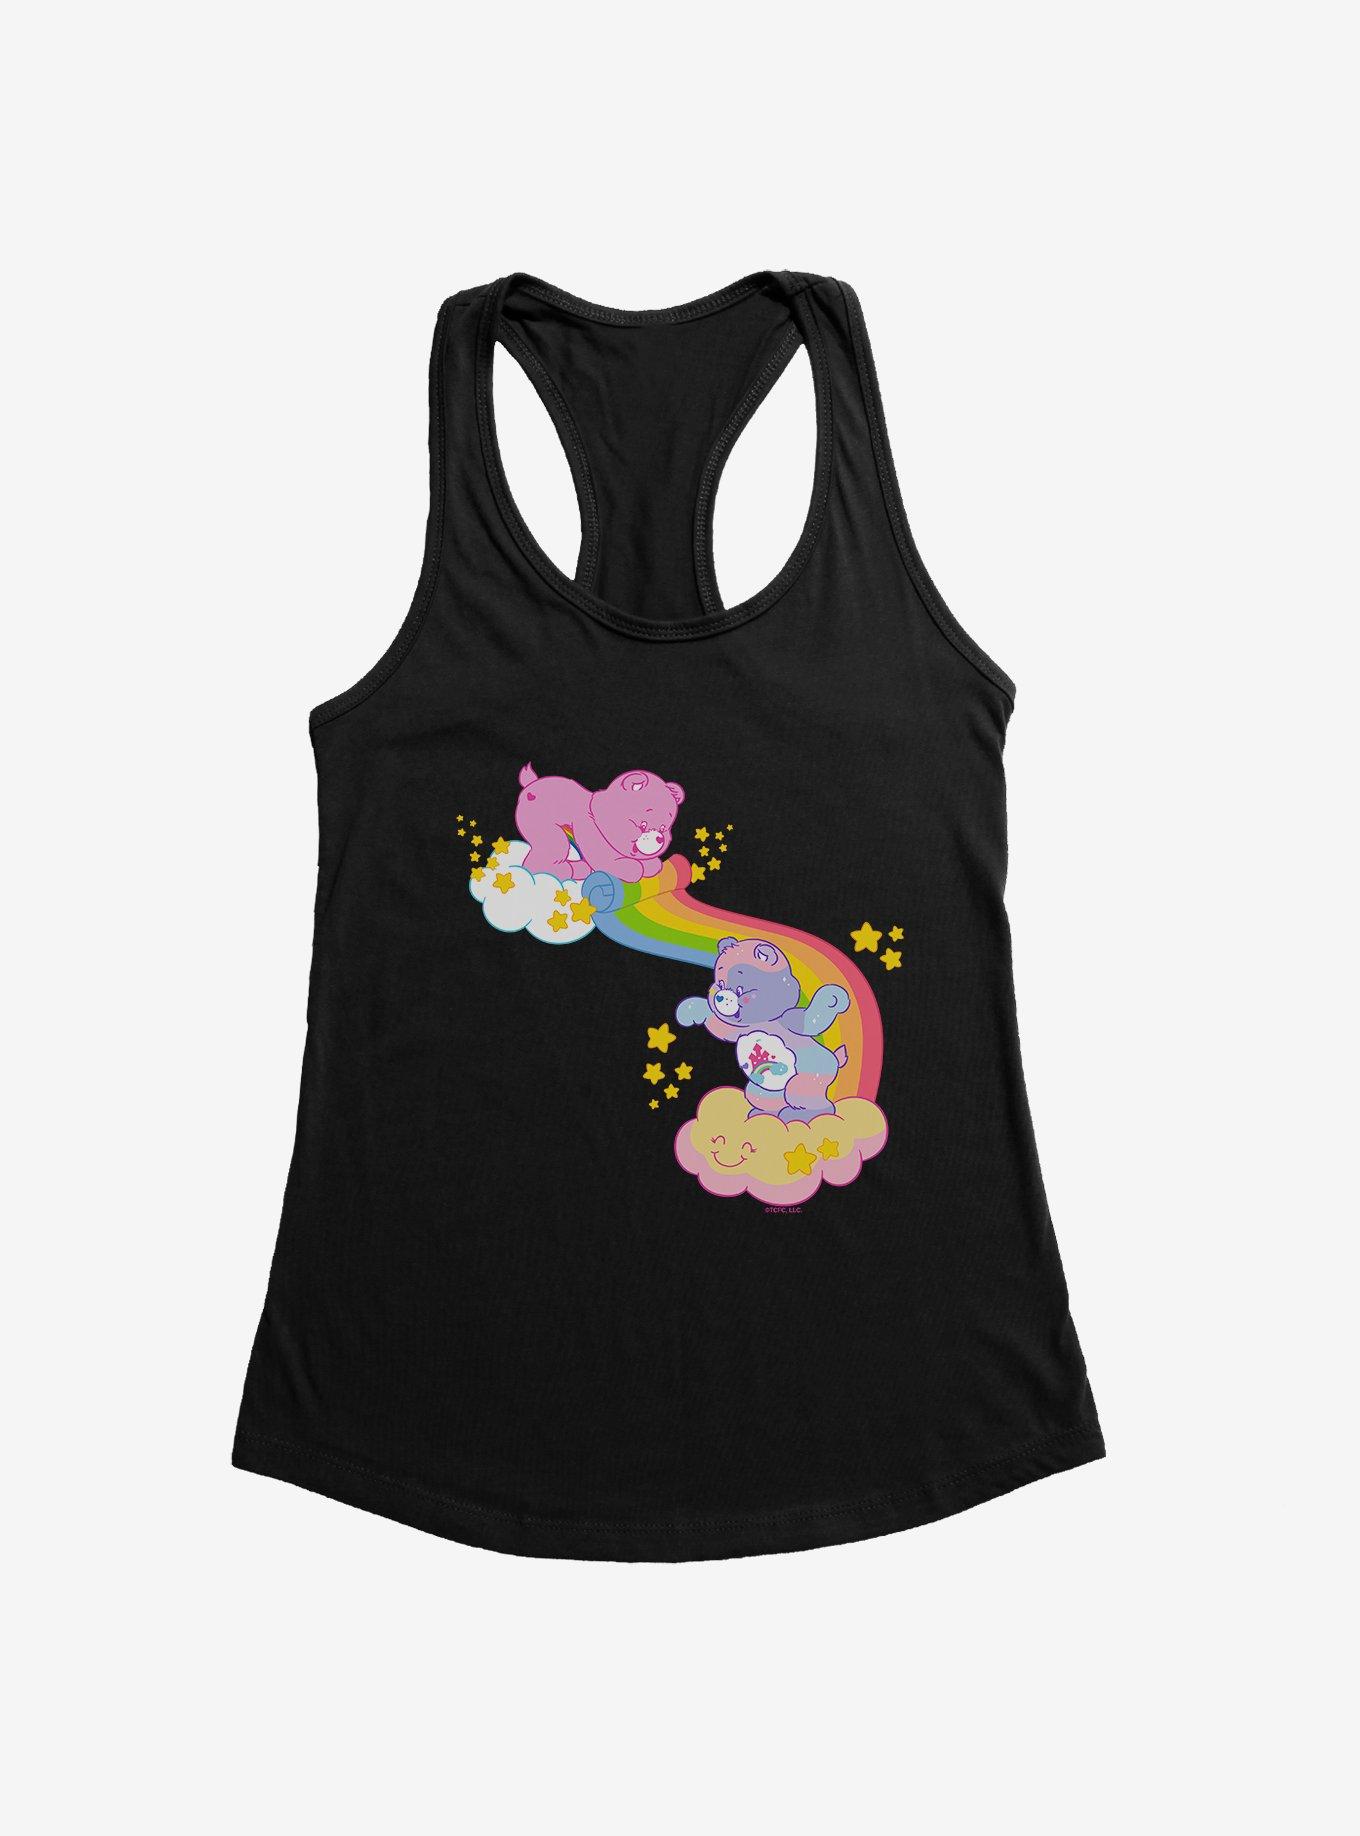 Care Bears In The Clouds Girls Tank, BLACK, hi-res